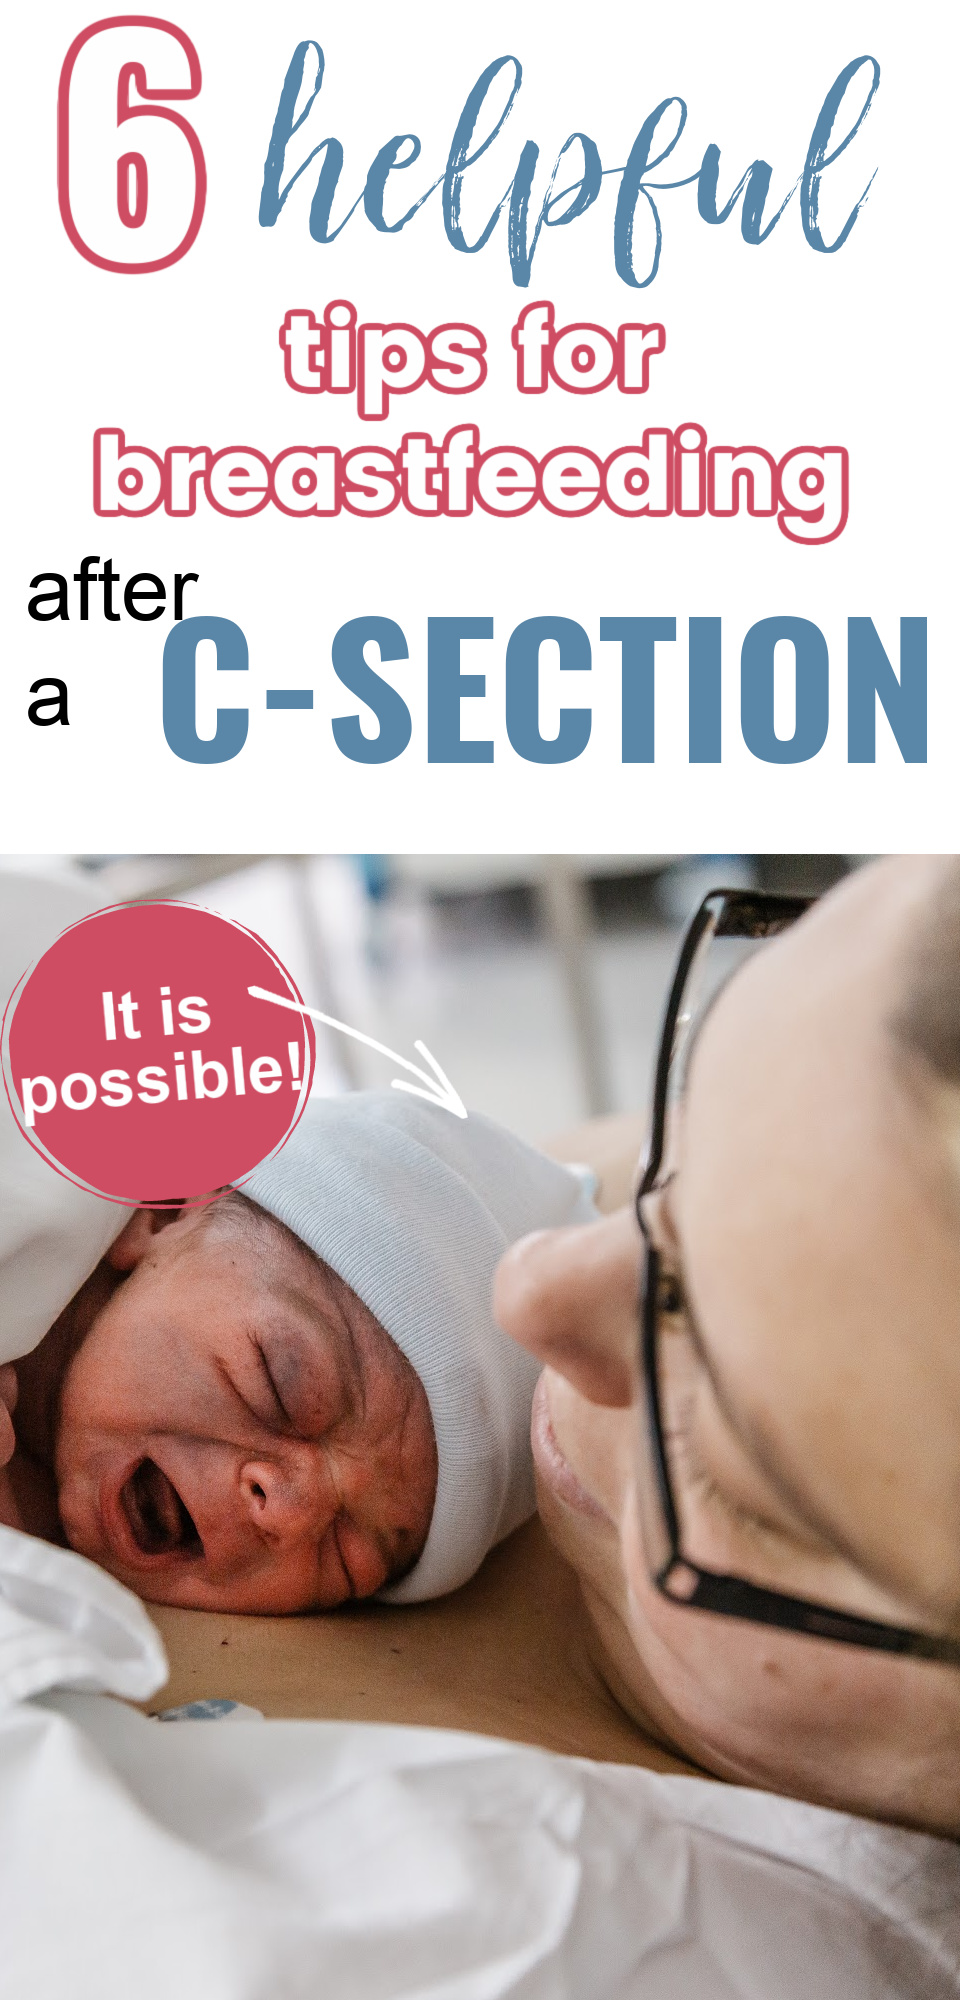 While there are some complications that can happen with breastfeeding after a c-section, there are plenty of things you can do to be successful! Here are 6 helpful tips for successful breastfeeding when you've had a c-section.